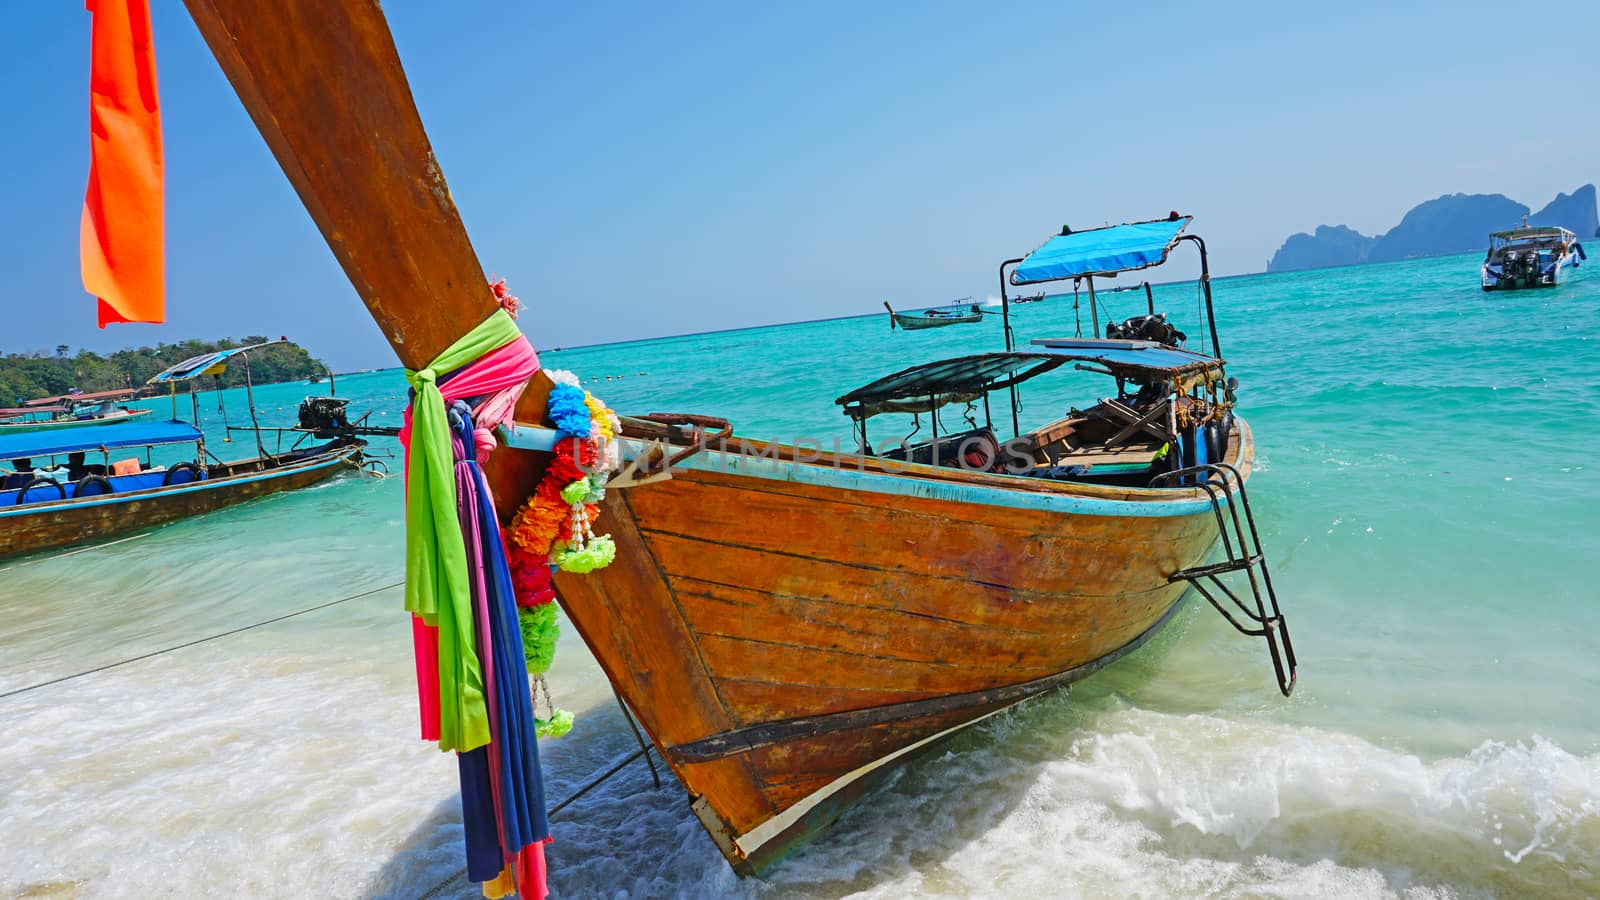 Sea long-tailed boats. Traditional Thai boats. Bright colored ribbons. Turquoise, blue, clear water. White sand on the beach. Holiday boat. A small wave. Travel to Asia. The Island Of Phi Phi Don.